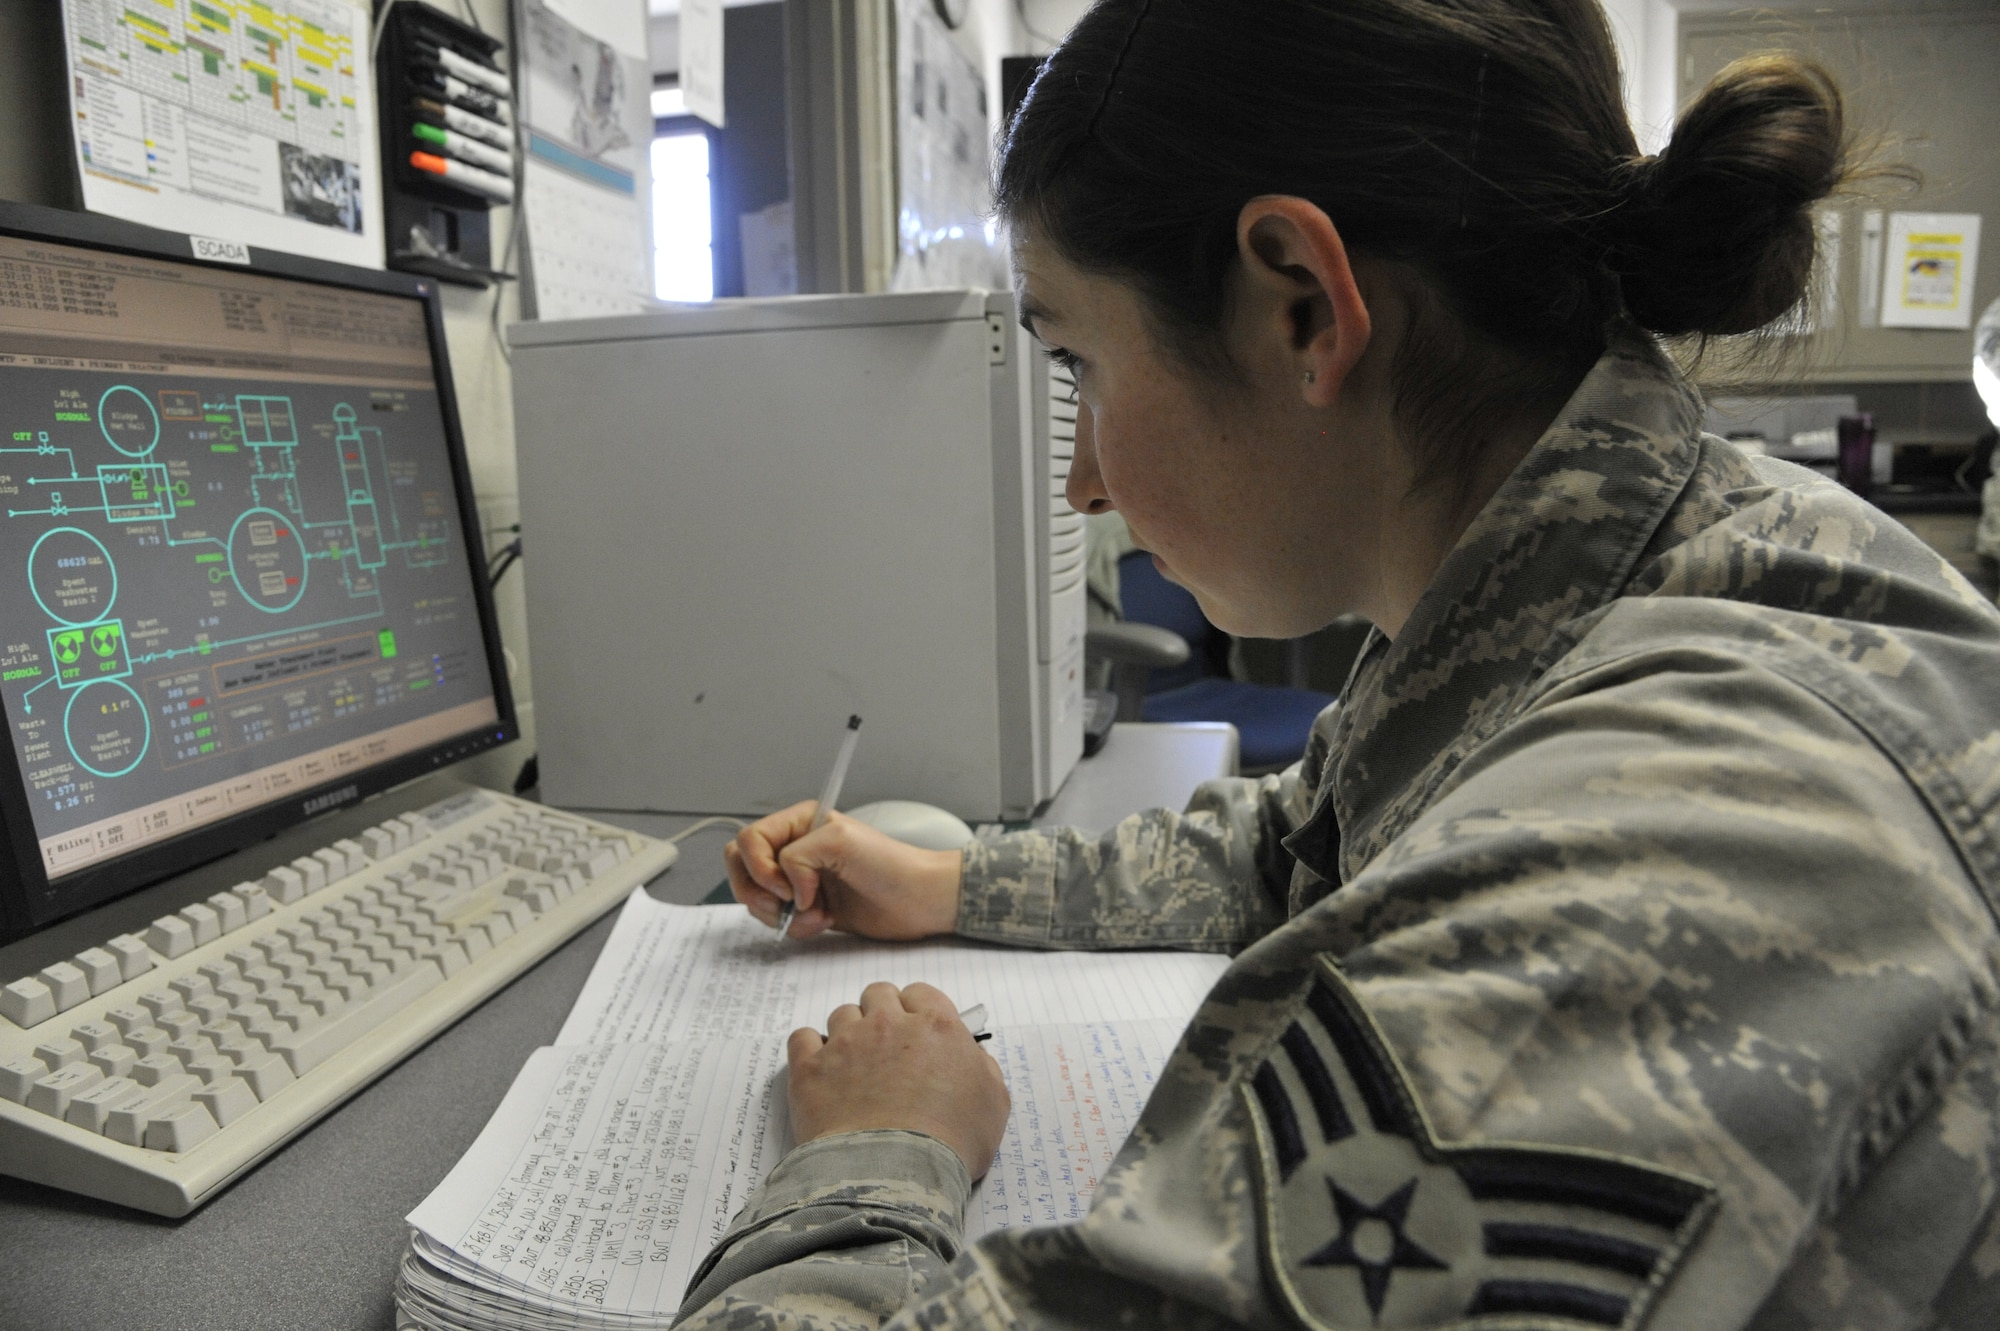 U.S. Air Force Senior Airman Jenifer Gormley, 509th Civil Engineer Squadron water and fuels maintenance journeyman, records information from the water plant monitoring computer at Whiteman Air Force Base, Mo., Feb. 27, 2014. This procedure monitors changes made throughout the day to the water system. (U.S. Air Force photo by Airman 1st Class Keenan Berry/ Released)